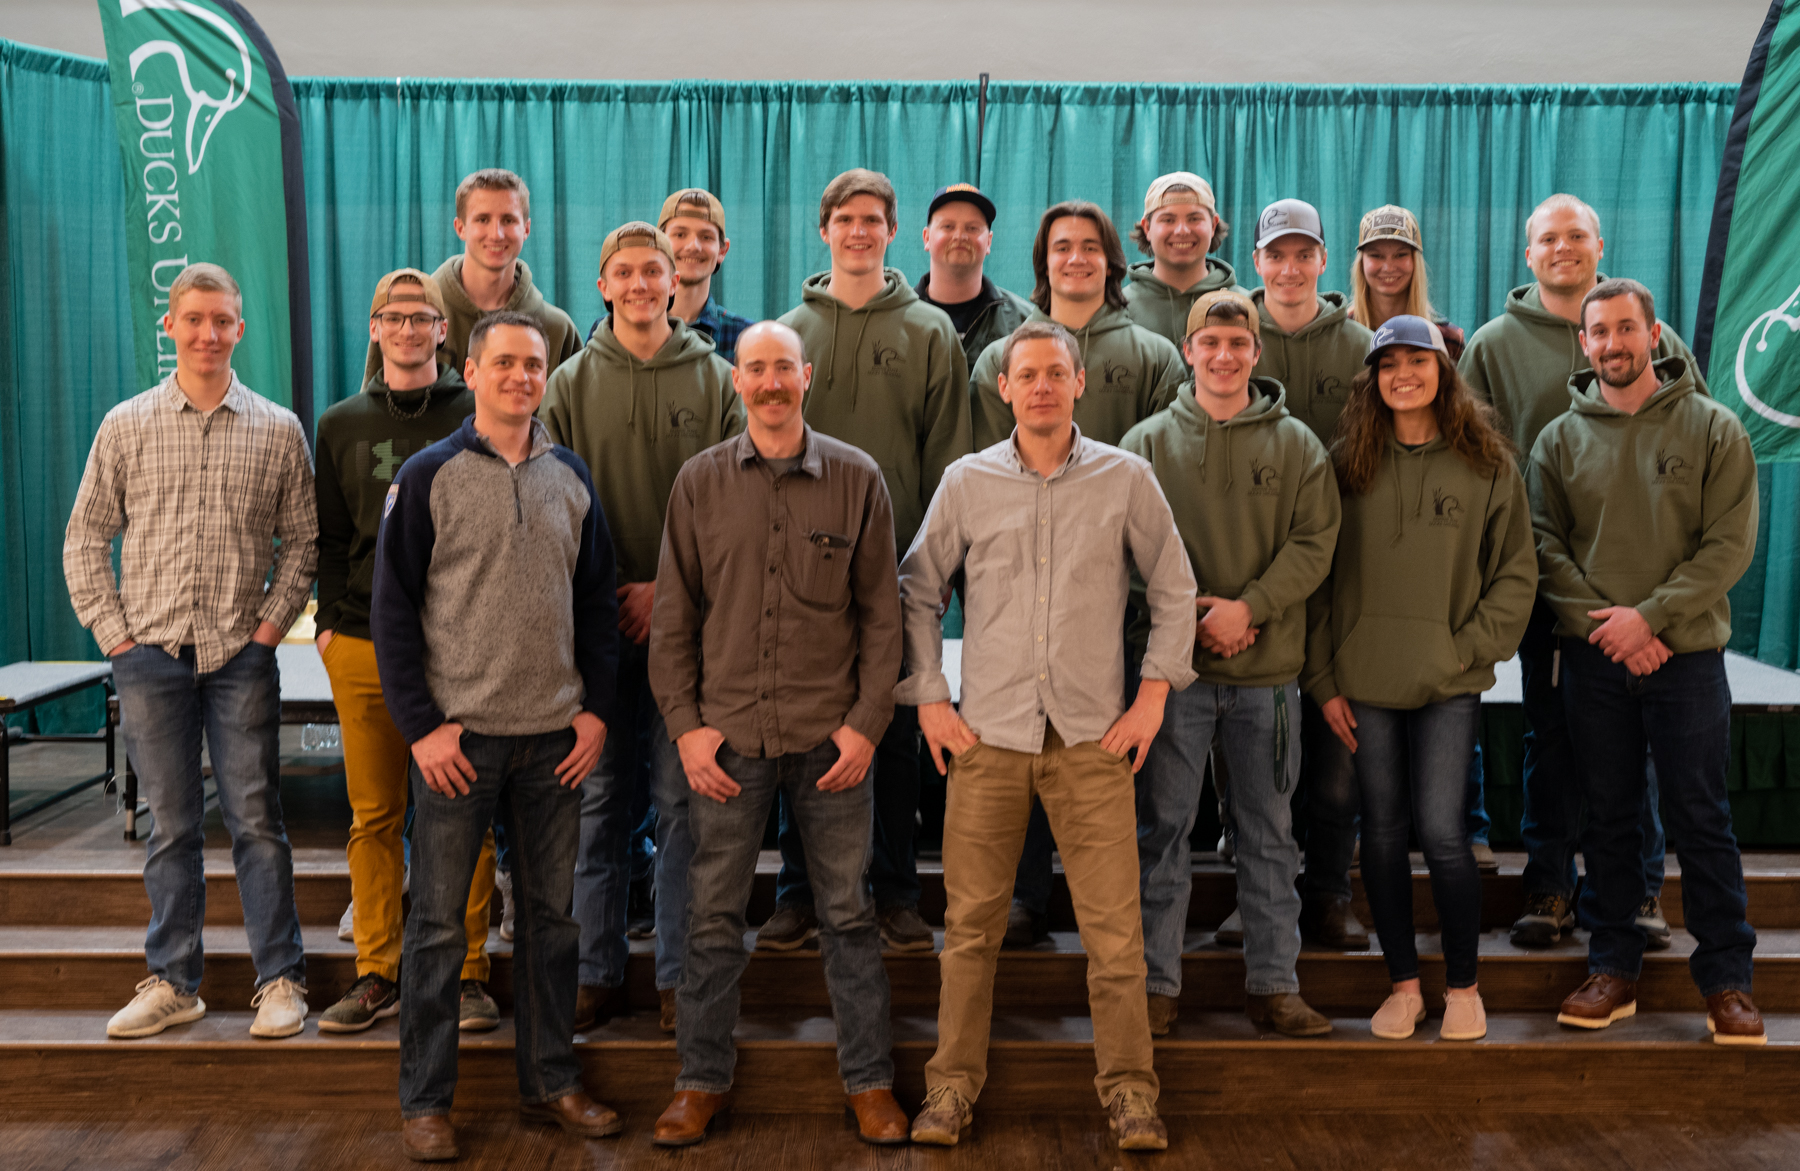 Steven Rinella and Ryan “Cal” Callaghan of the “MeatEater” Netflix show and podcast attended events hosted by the BSU chapter of Ducks Unlimited.